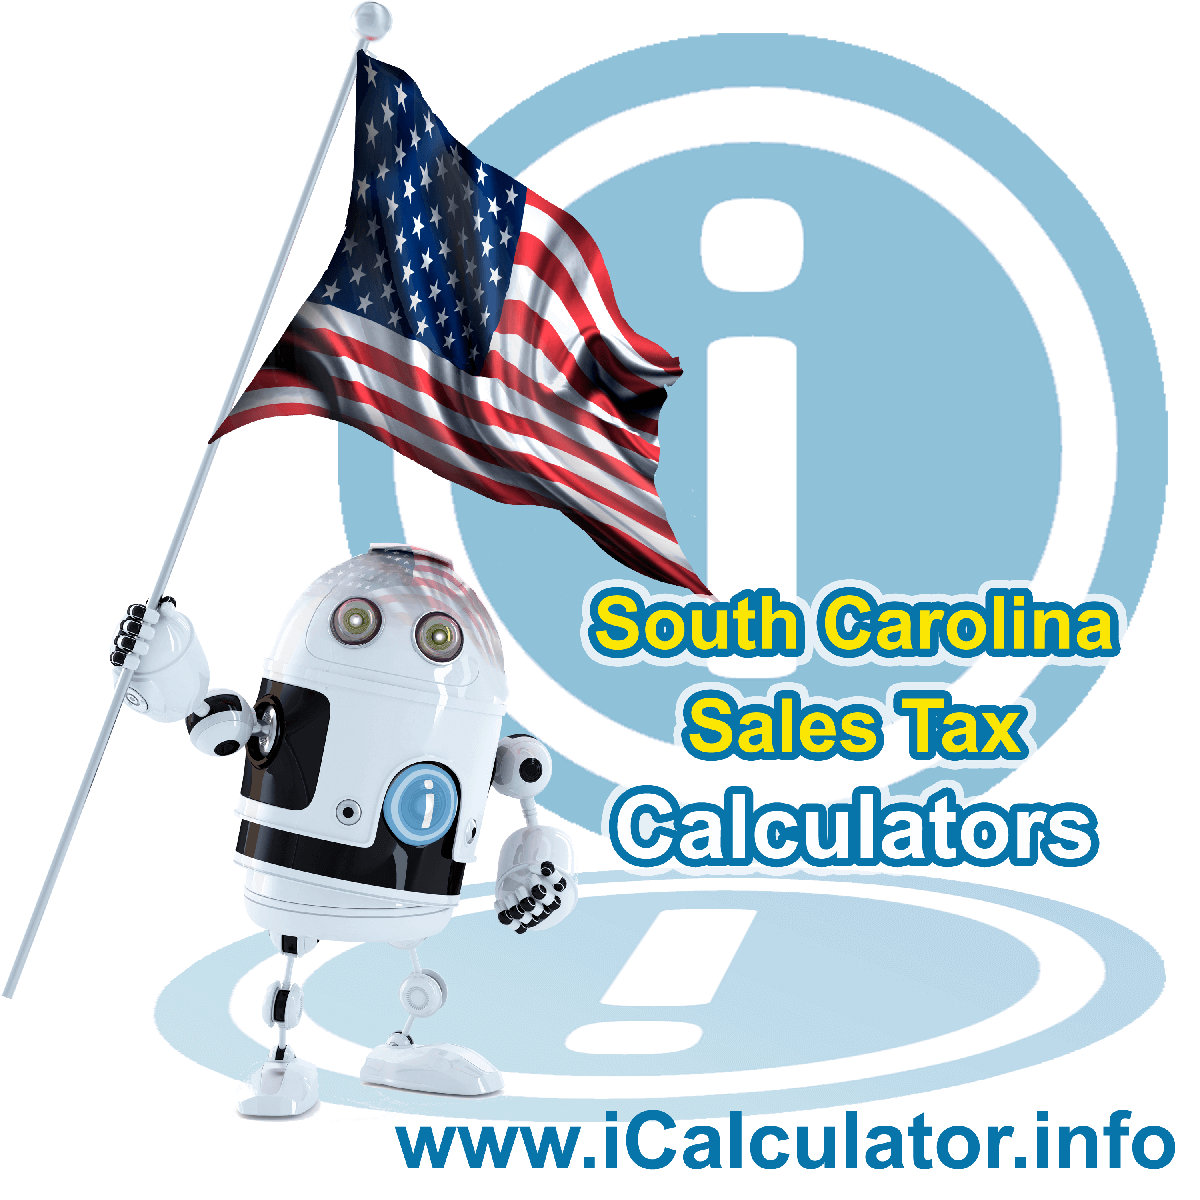 Lexington Sales Rates: This image illustrates a calculator robot calculating Lexington sales tax manually using the Lexington Sales Tax Formula. You can use this information to calculate Lexington Sales Tax manually or use the Lexington Sales Tax Calculator to calculate sales tax online.